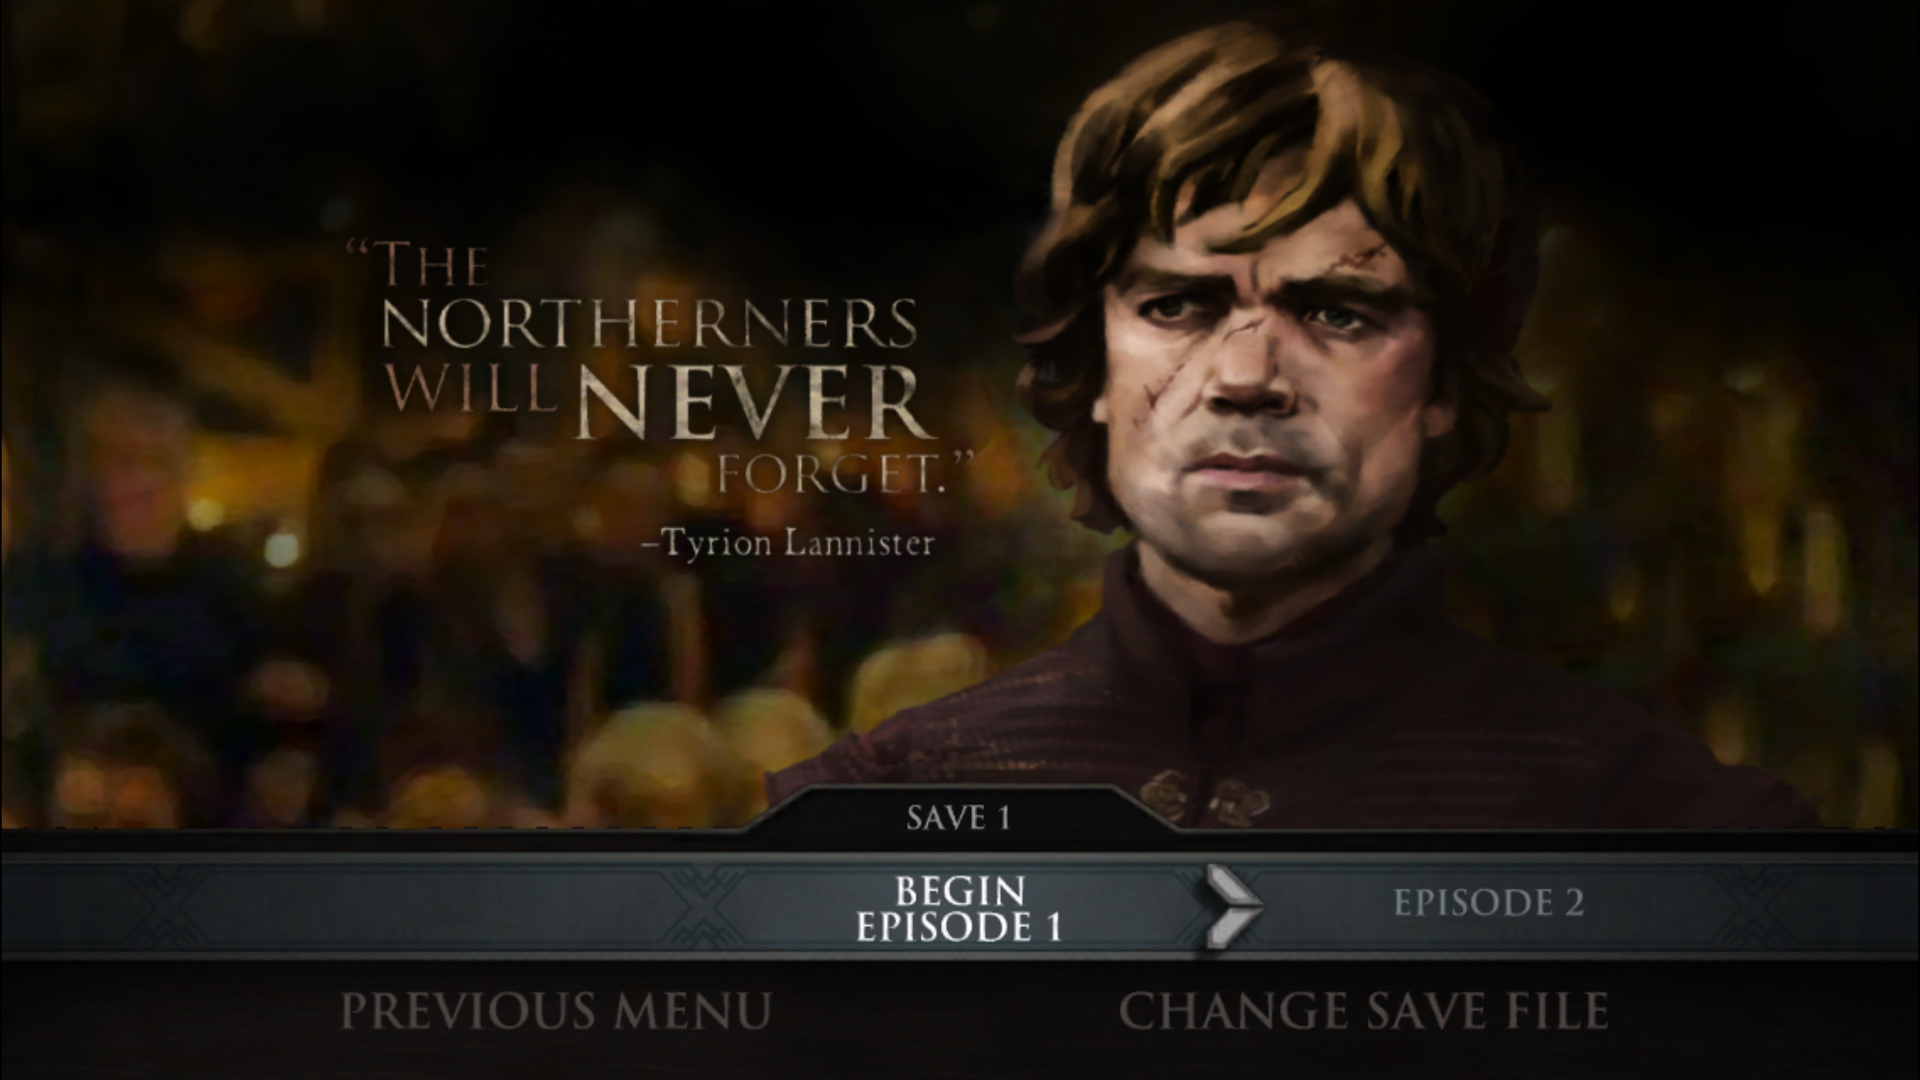 Android application Game of Thrones screenshort